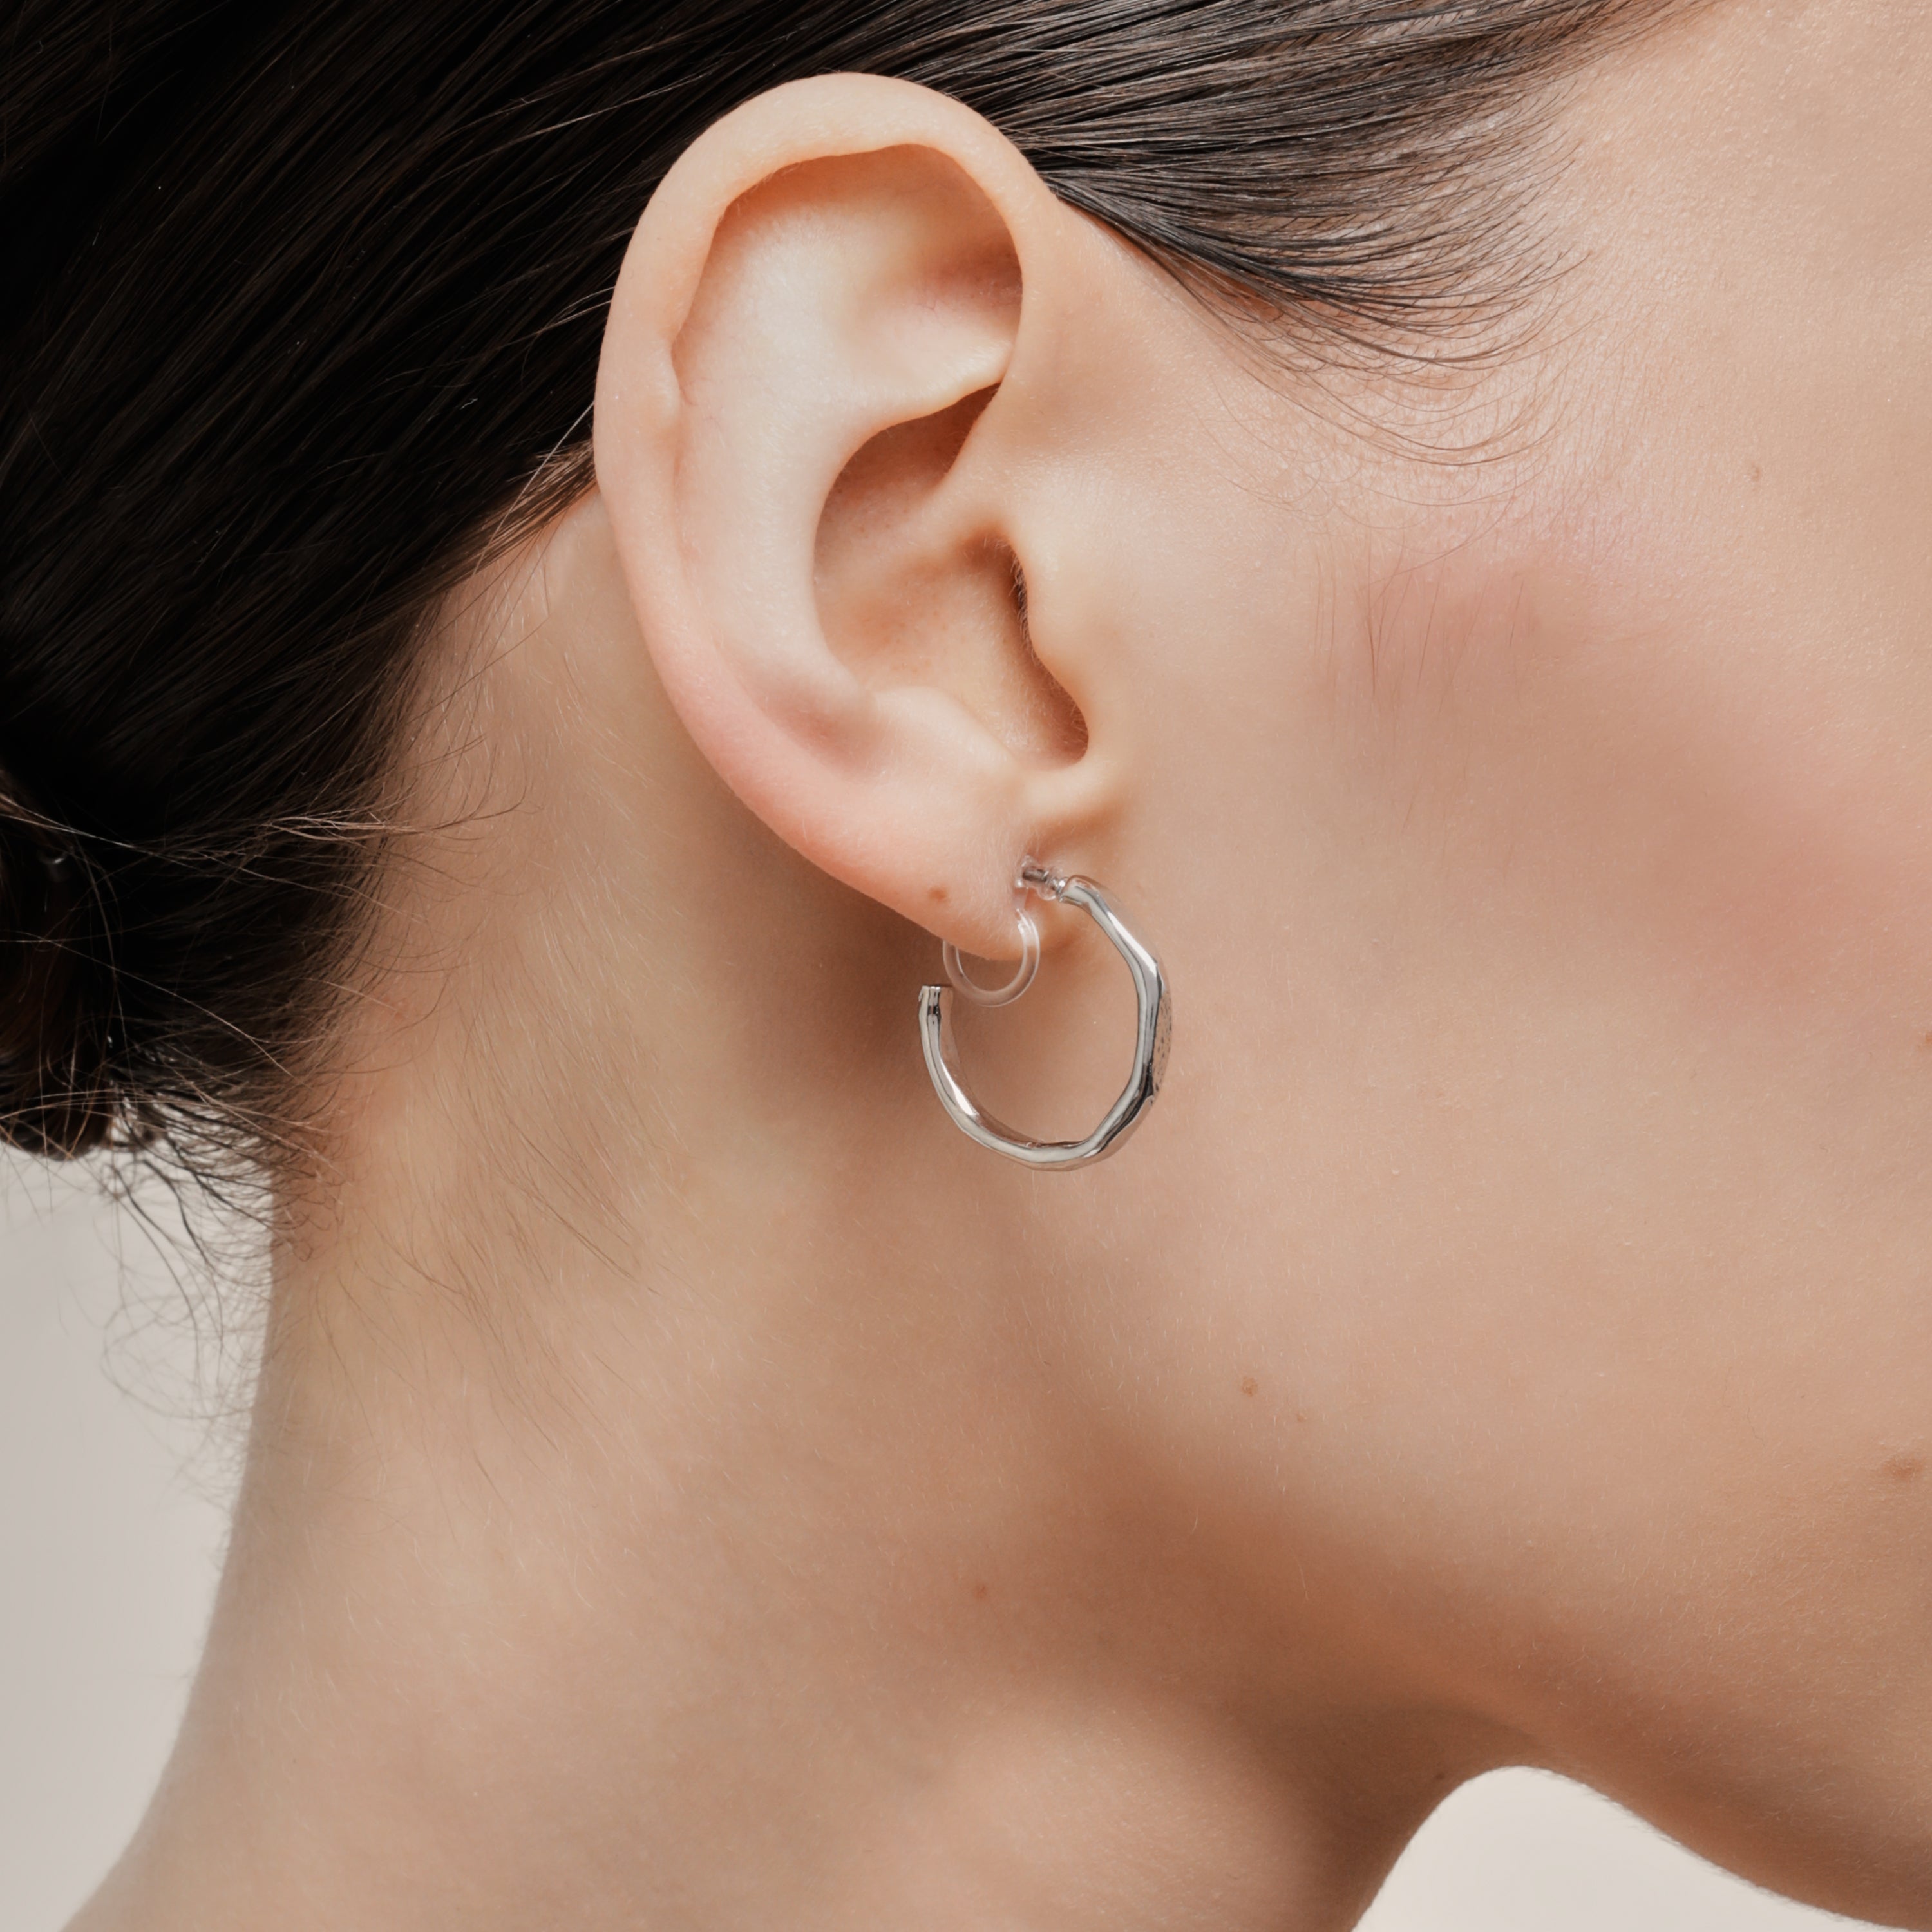 A model wearing the Smith Hoop Clip On Earrings in Silver, perfect for all ear sizes. With a resin clip-on closure and medium secure hold, these earrings provide comfort for 8-12 hours. Whether you have thick, large, or sensitive ears, these earrings are a must-have! Note: No adjustments possible and one pair only.